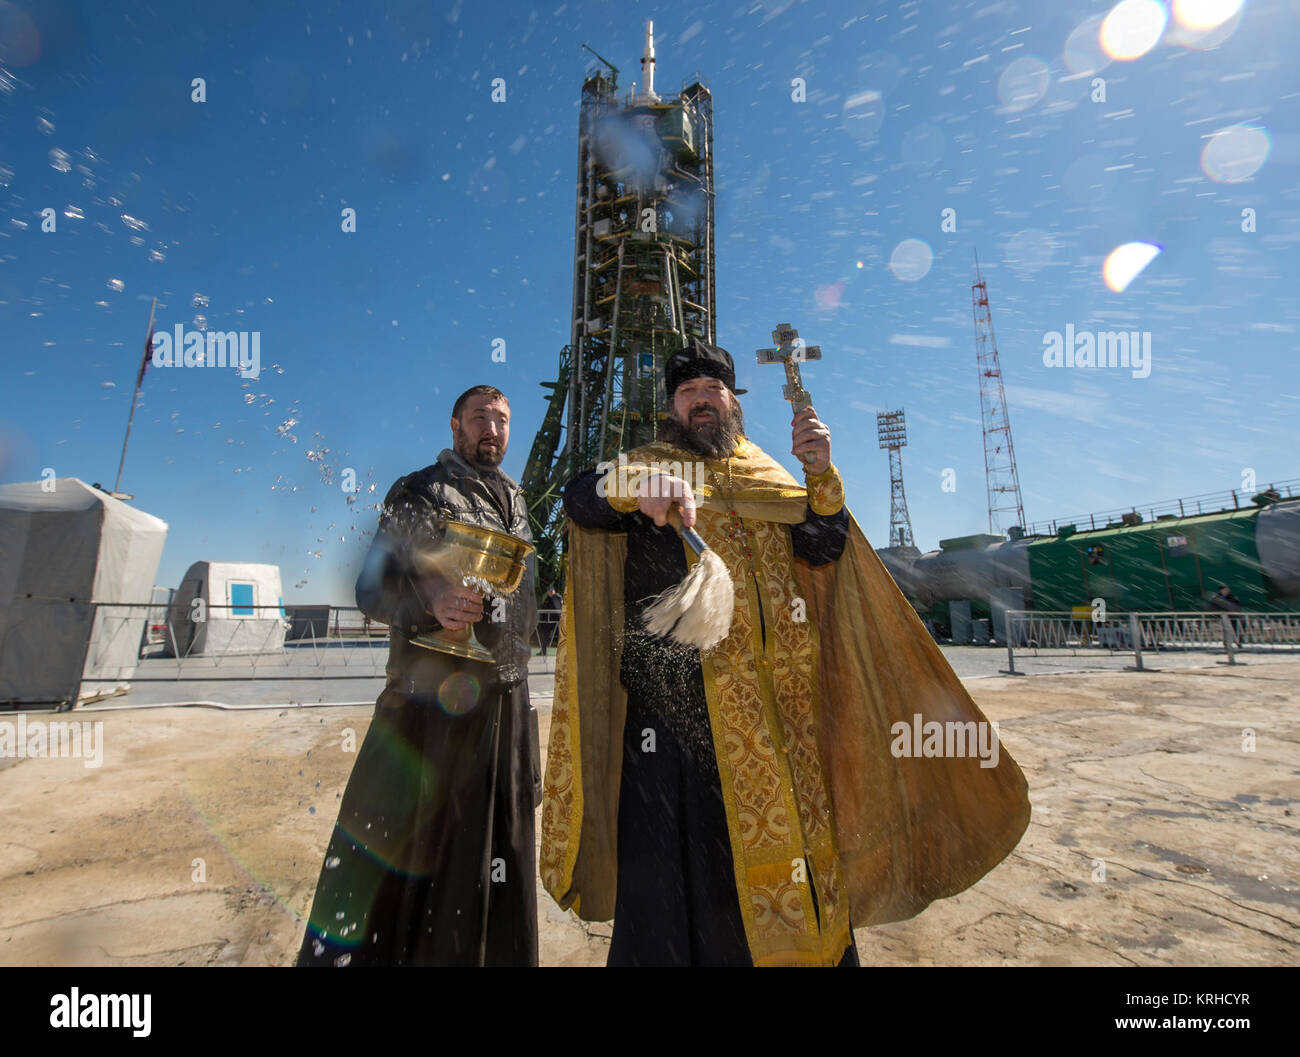 An Orthodox Priest blesses members of the media after he blessed the Soyuz rocket at the Baikonur Cosmodrome Launch pad on Thursday, March 26, 2015 in Kazakhstan. NASA Astronaut Scott Kelly, and Russian Cosmonauts Mikhail Kornienko, and Gennady Padalka of the Russian Federal Space Agency (Roscosmos) are scheduled to launch to the International Space Station in the Soyuz TMA-16M spacecraft from the Baikonur Cosmodrome in Kazakhstan March 28, Kazakh time (March 27 Eastern time.) As the one-year crew, Kelly and Kornienko will return to Earth on Soyuz TMA-18M in March 2016.  Photo Credit (NASA/Bil Stock Photo